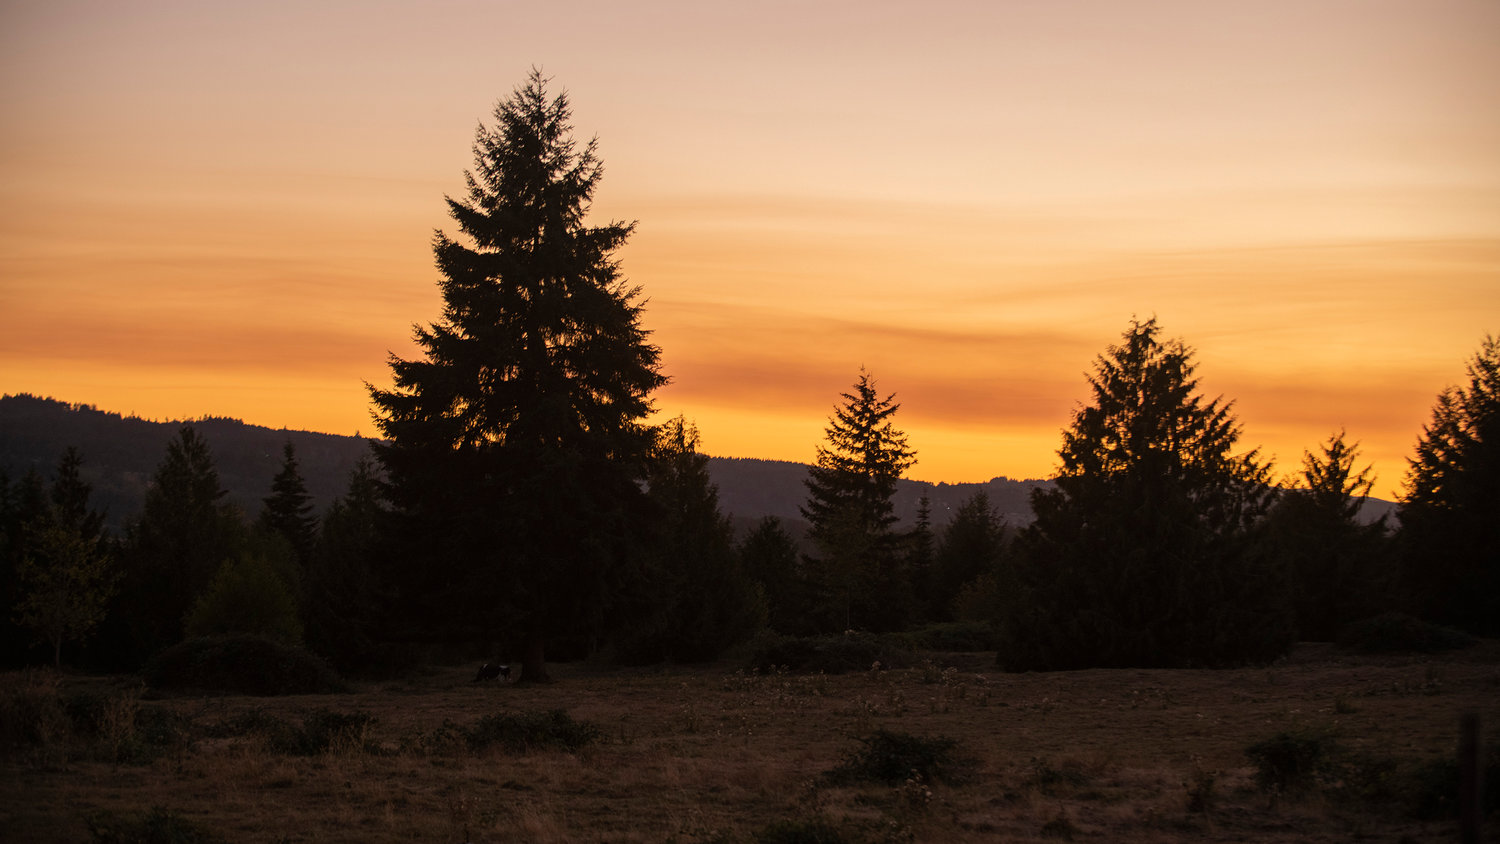 The sun sets over the Willapa Hills as seen from Highway 603 near Tune Road.